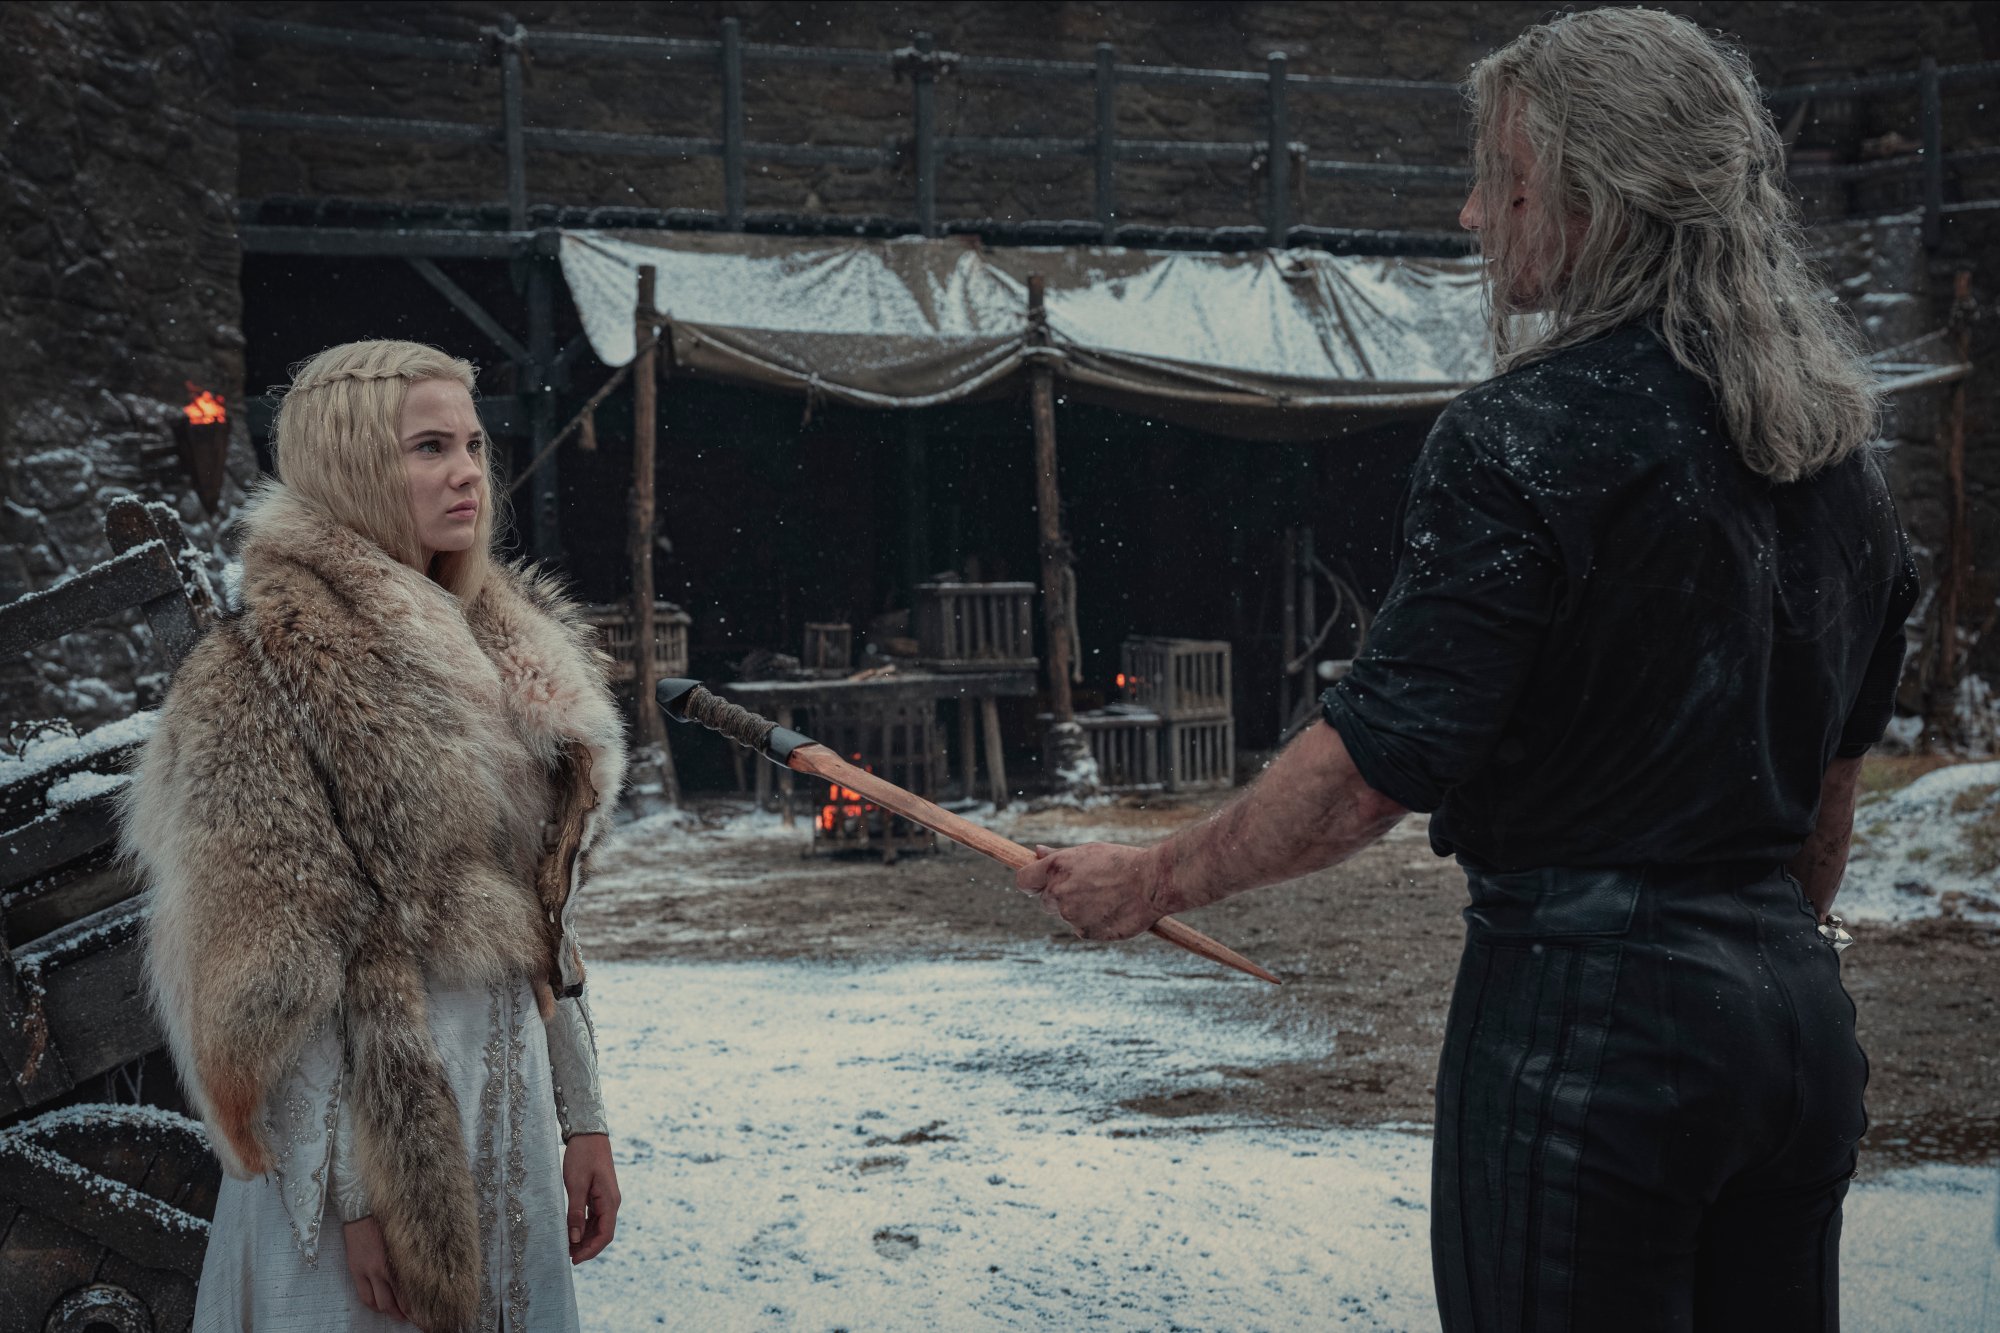 The Witcher season 2: What to expect from the new characters